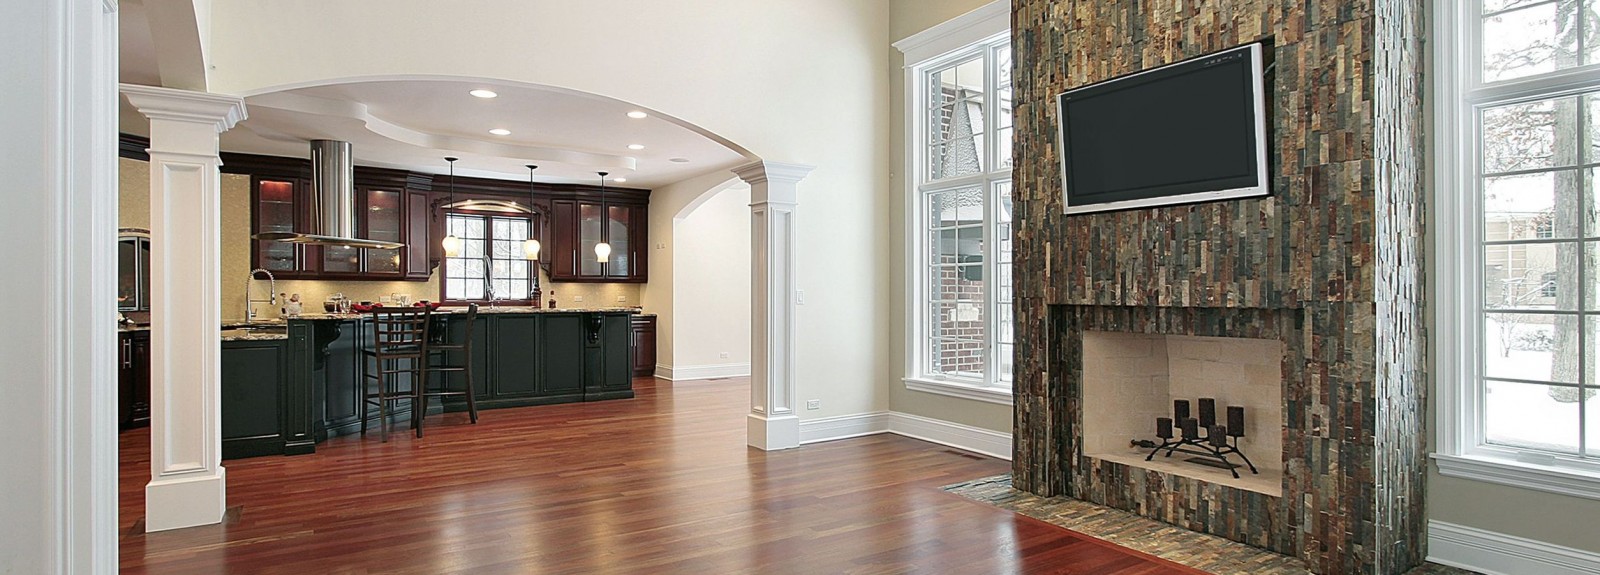 Imagine the natural looking hardwood floor in your family room…